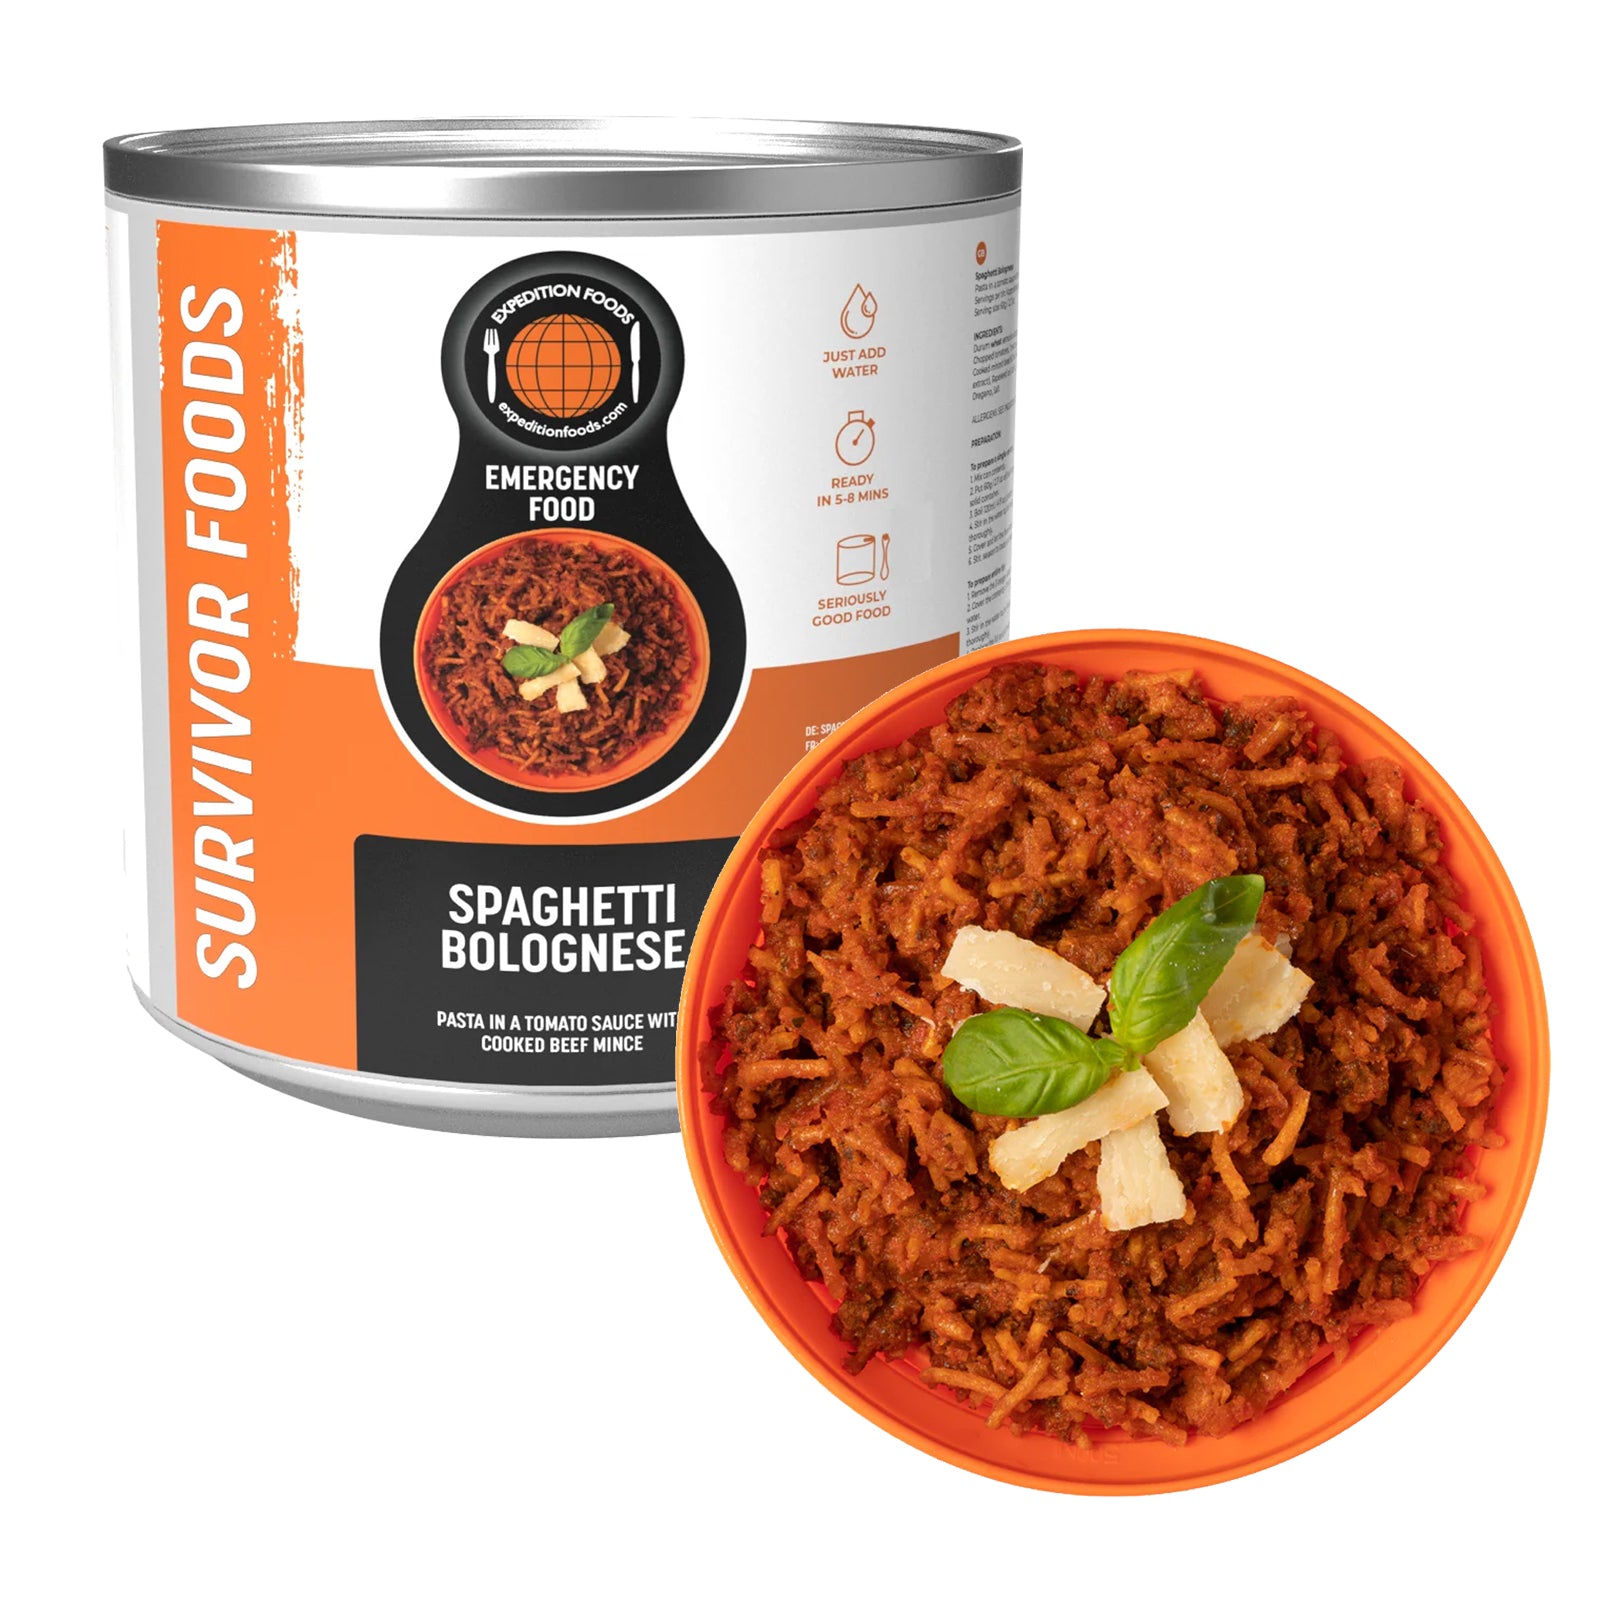 Expedition Foods Spaghetti Bolognese Meal Long Life